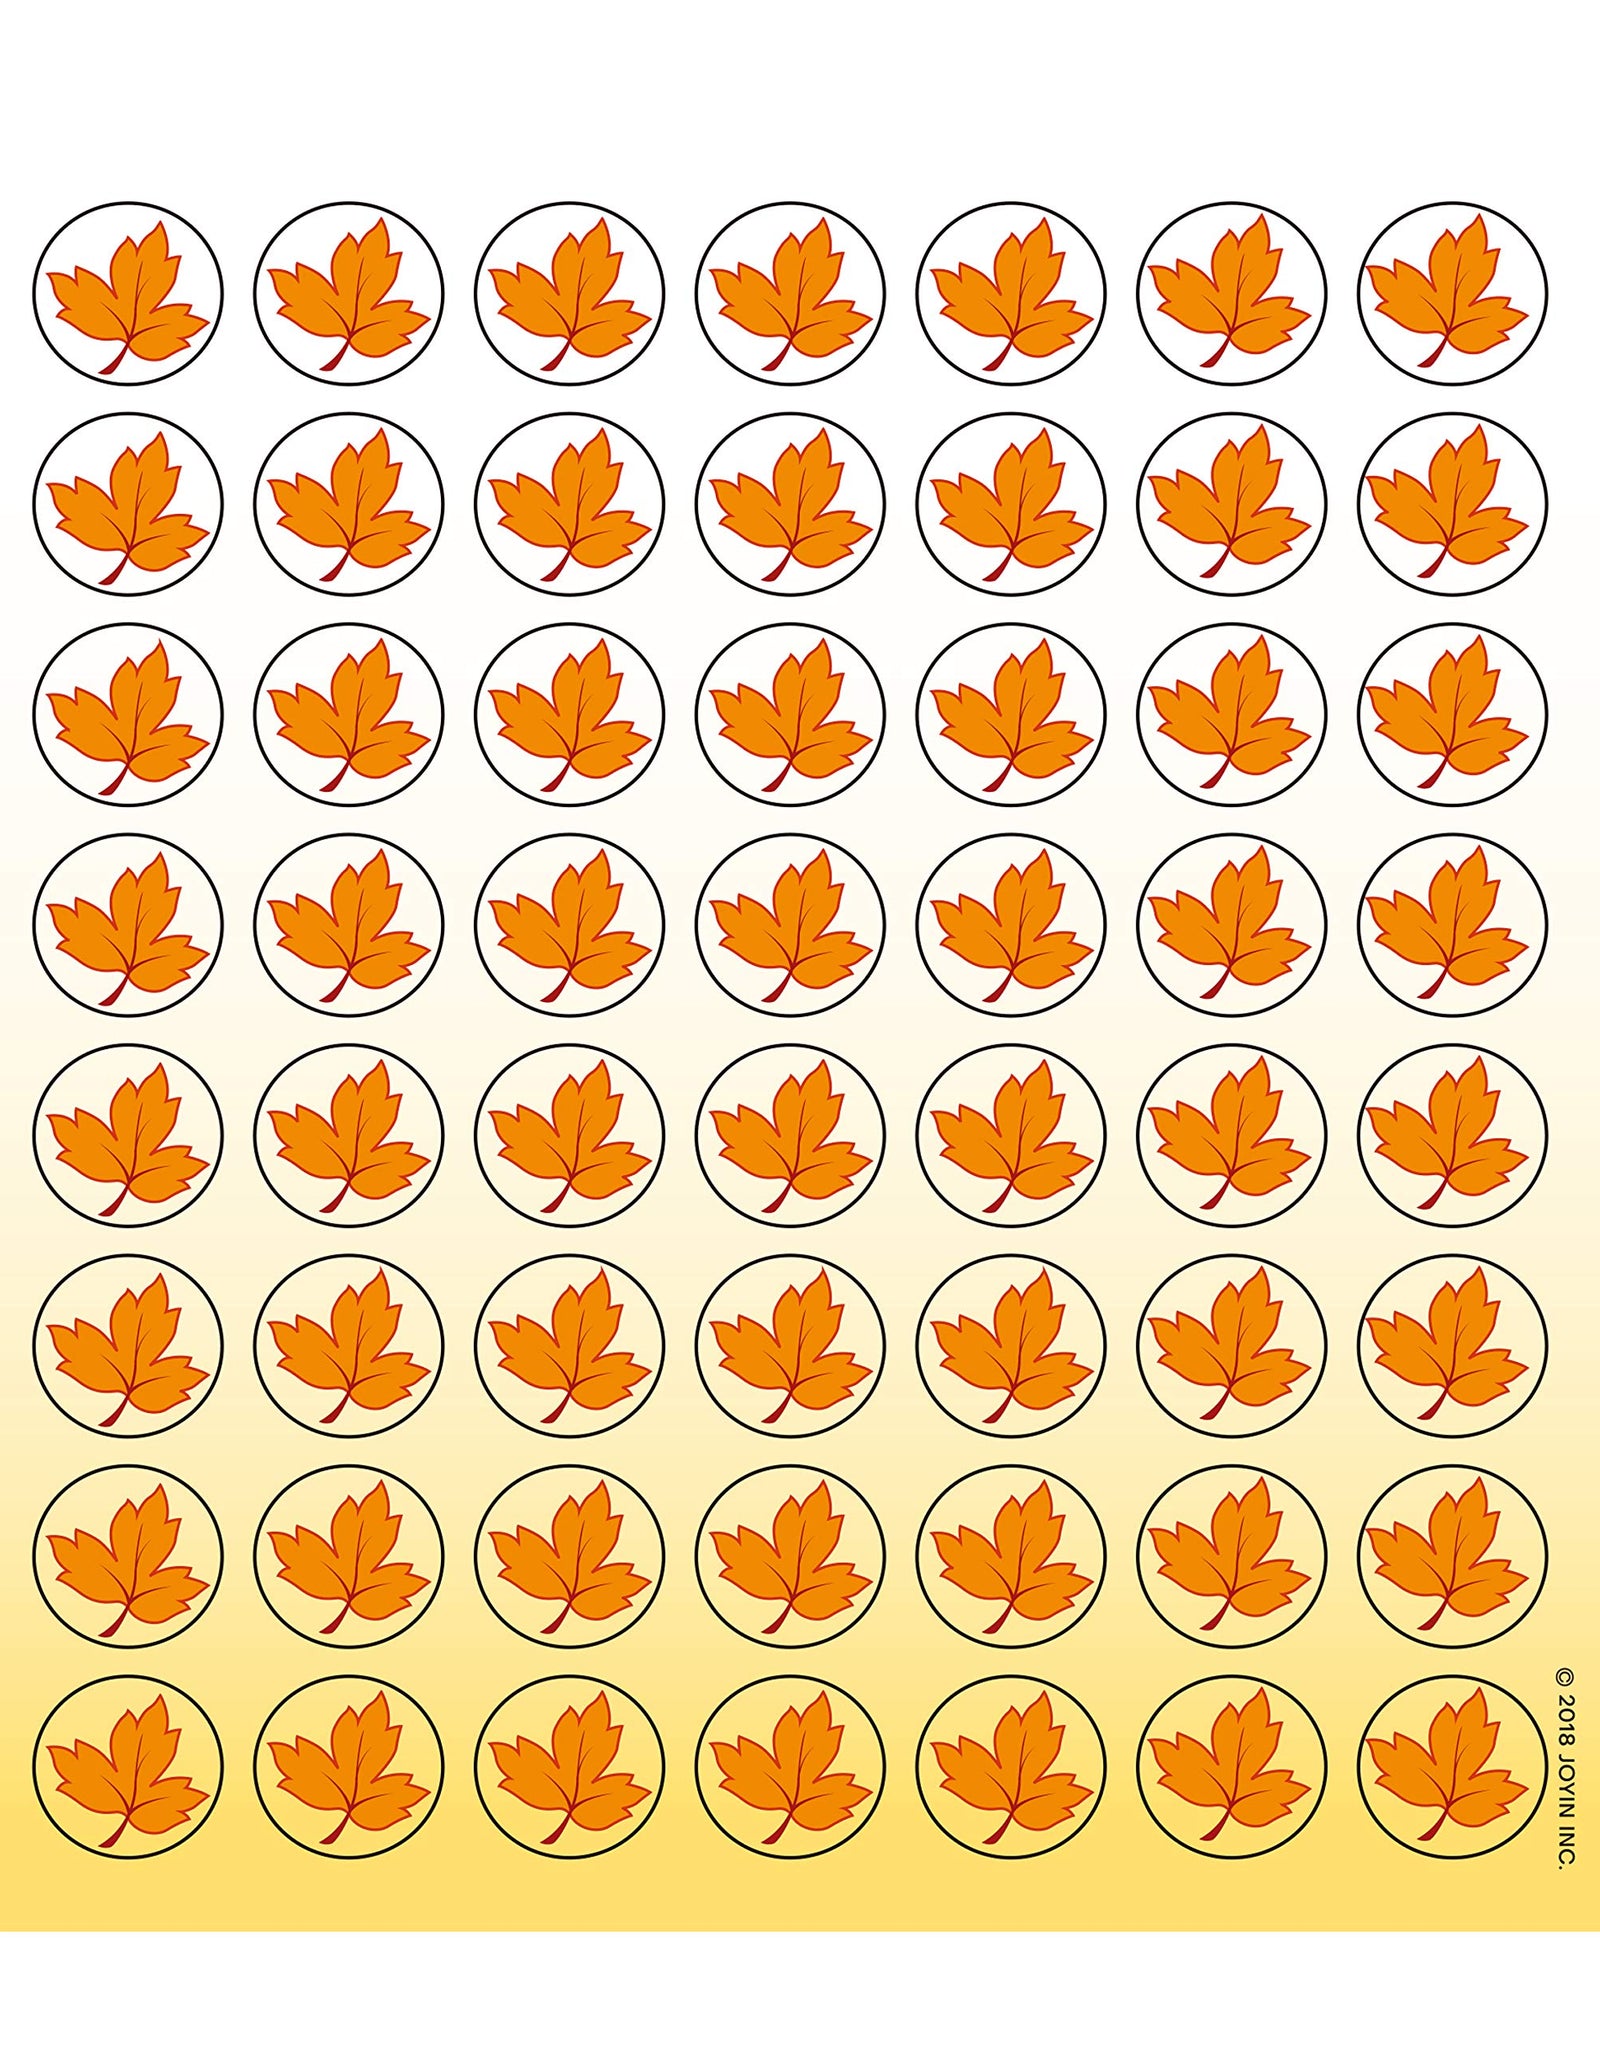 28 Players Thanksgiving Bingo Cards (5x5) for Kids Family Activities, Party Card Games, School Classroom Games, Turkey Party Favors Supplies.